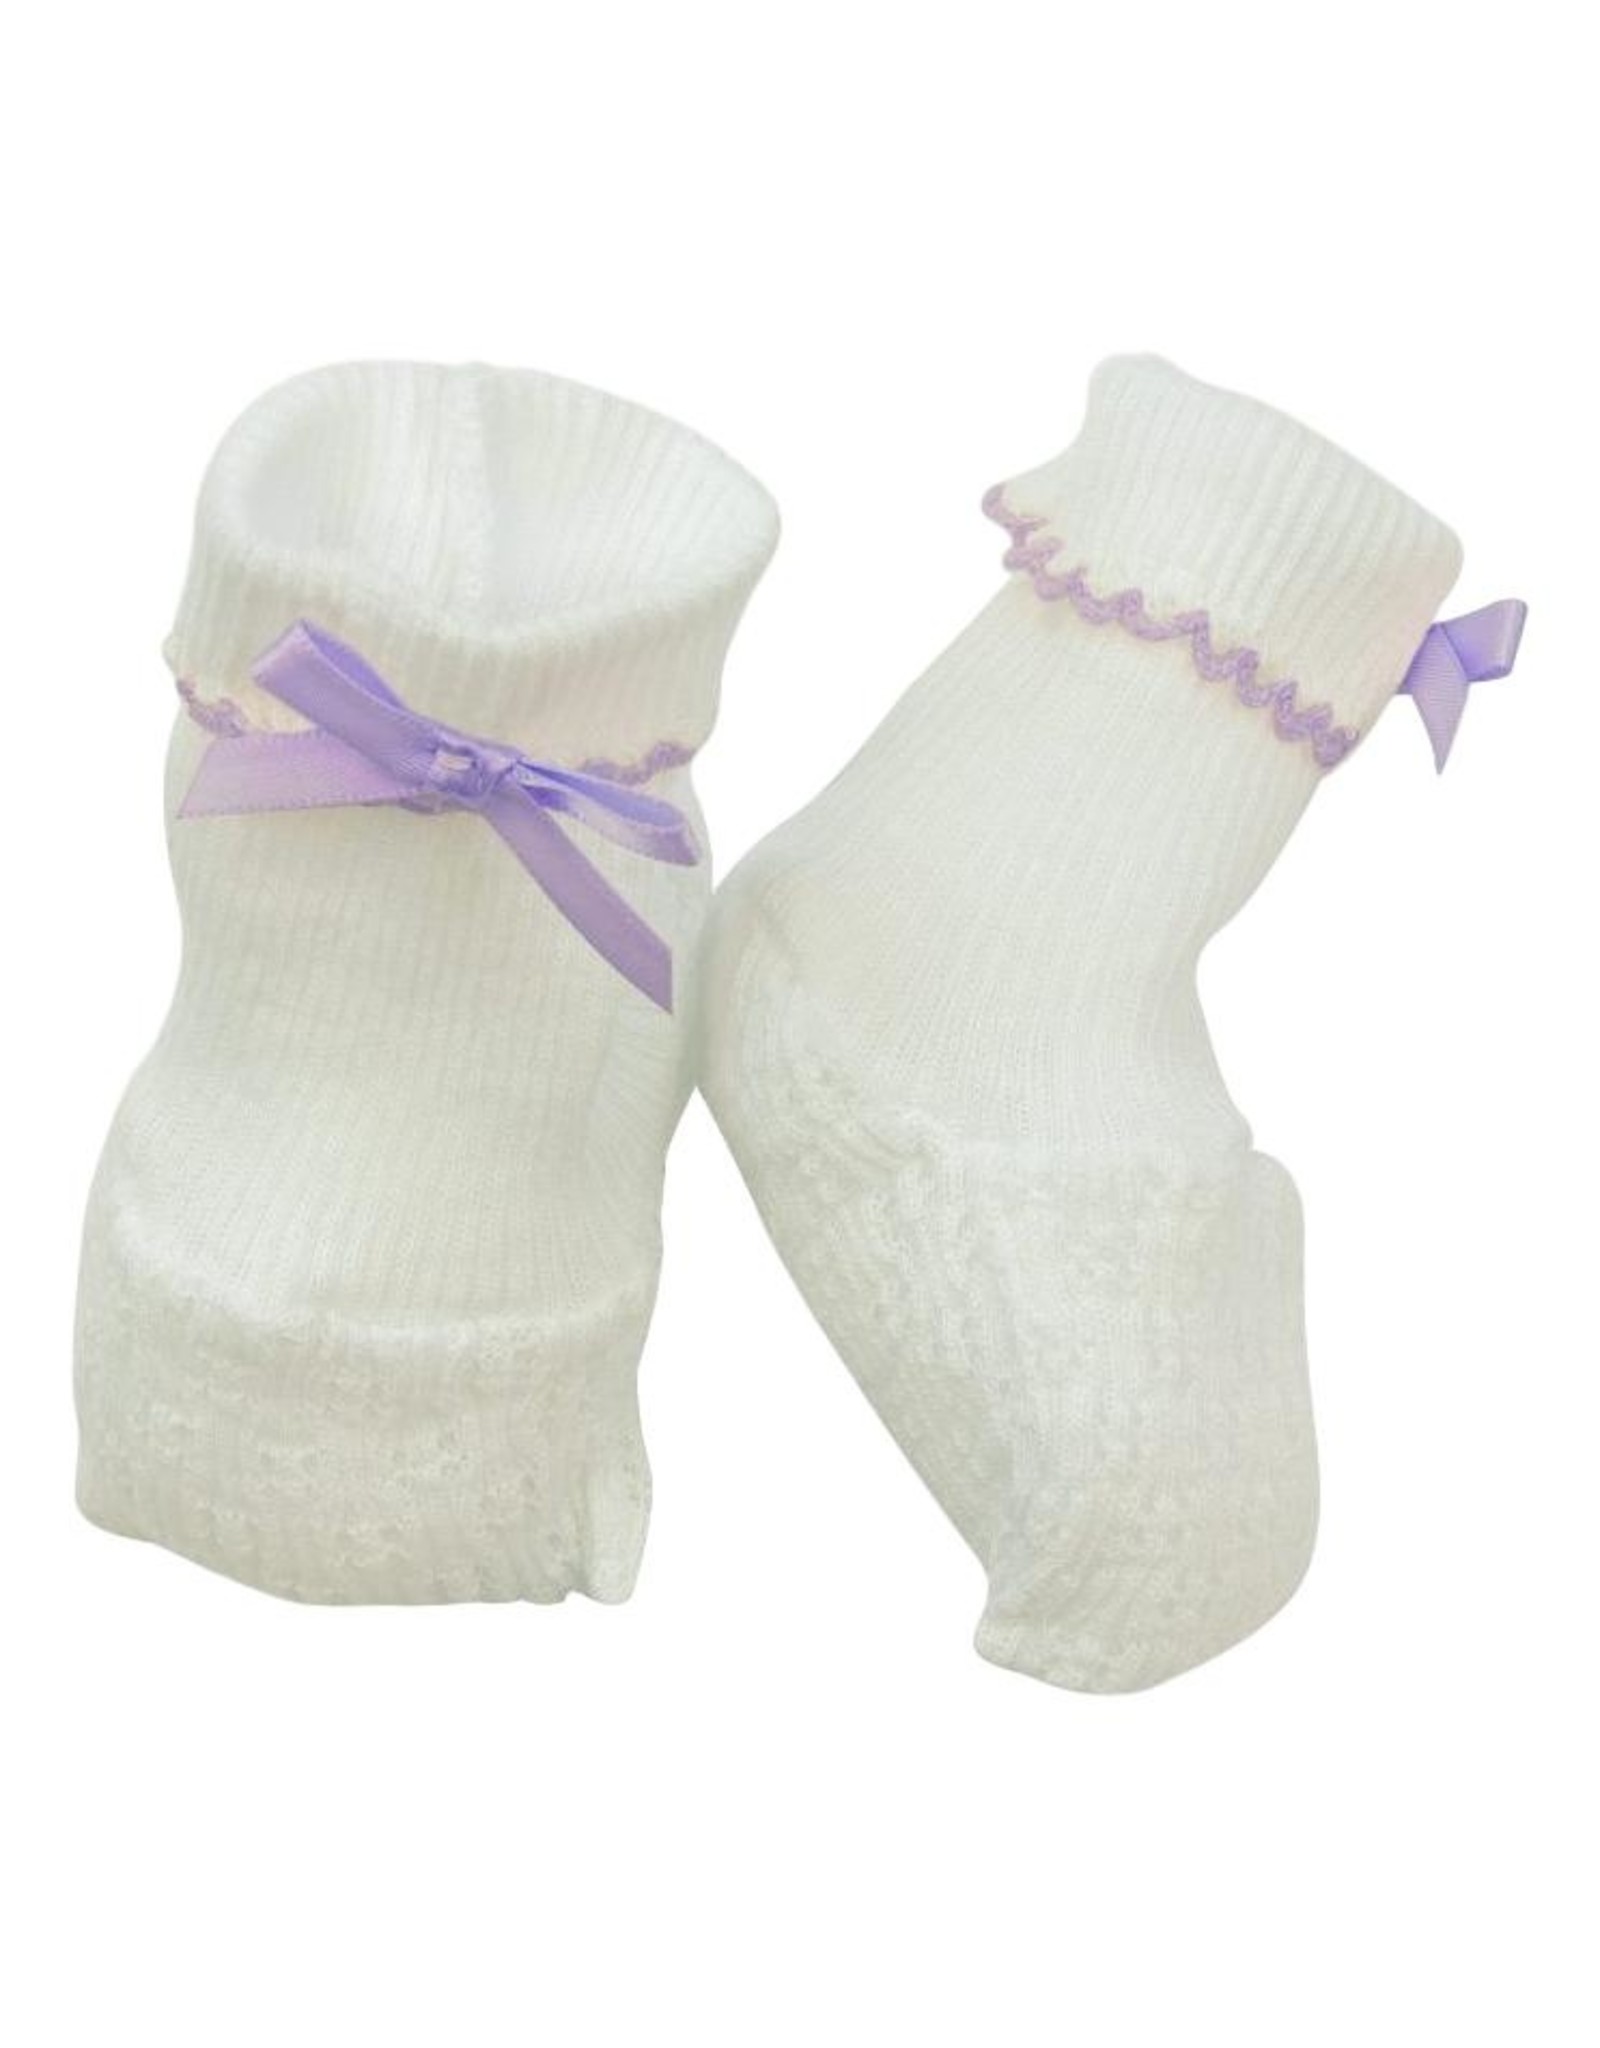 Paty, Inc. 158 Booties w/ Bow lavender